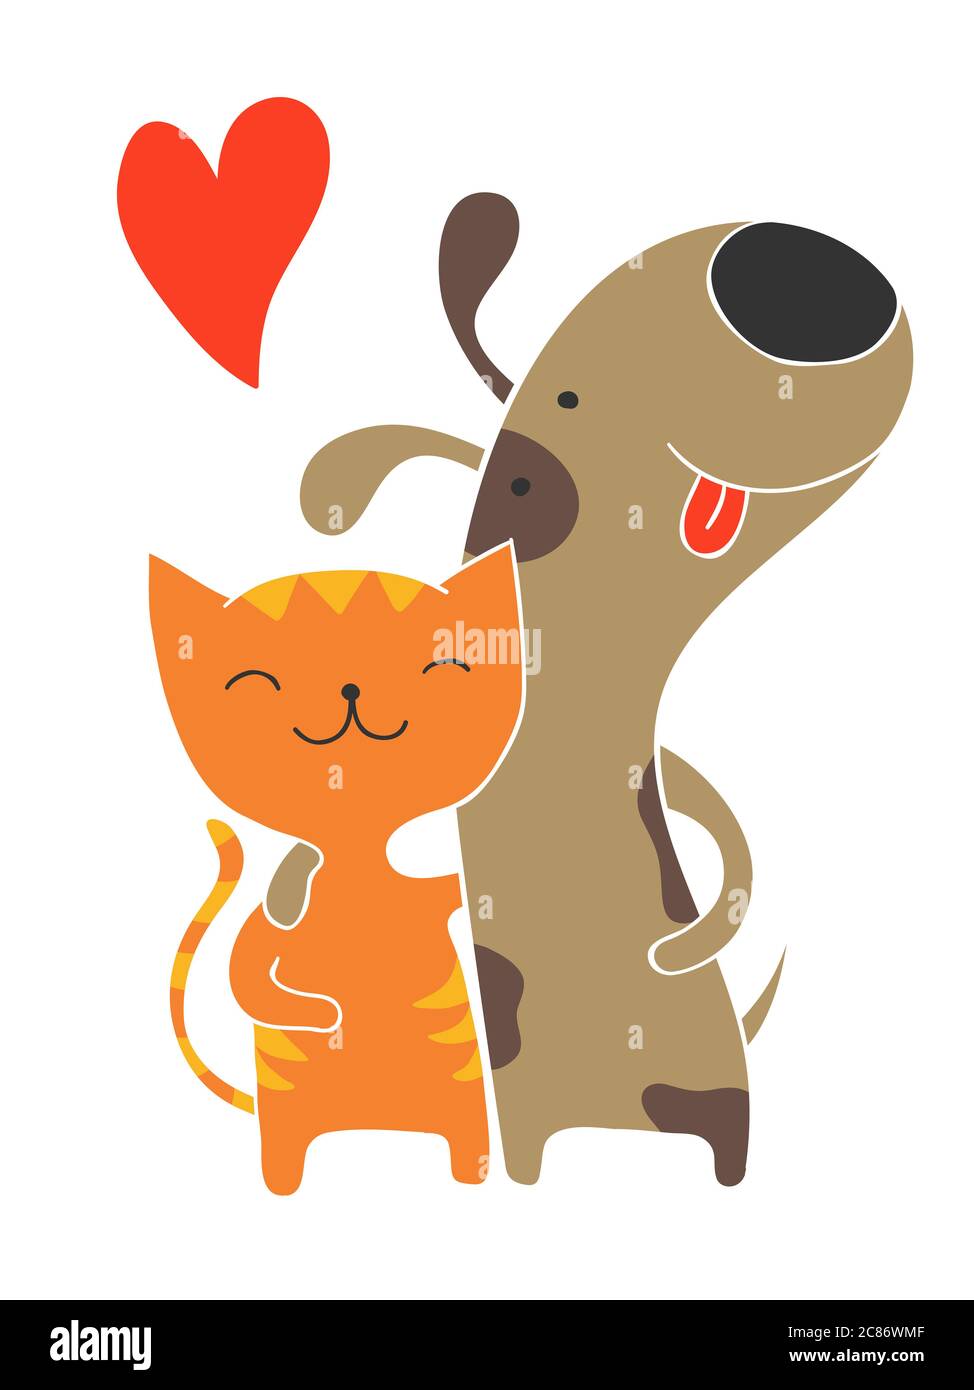 Cute cartoon cat and dog holding each other. They are best friends forever  Stock Photo - Alamy